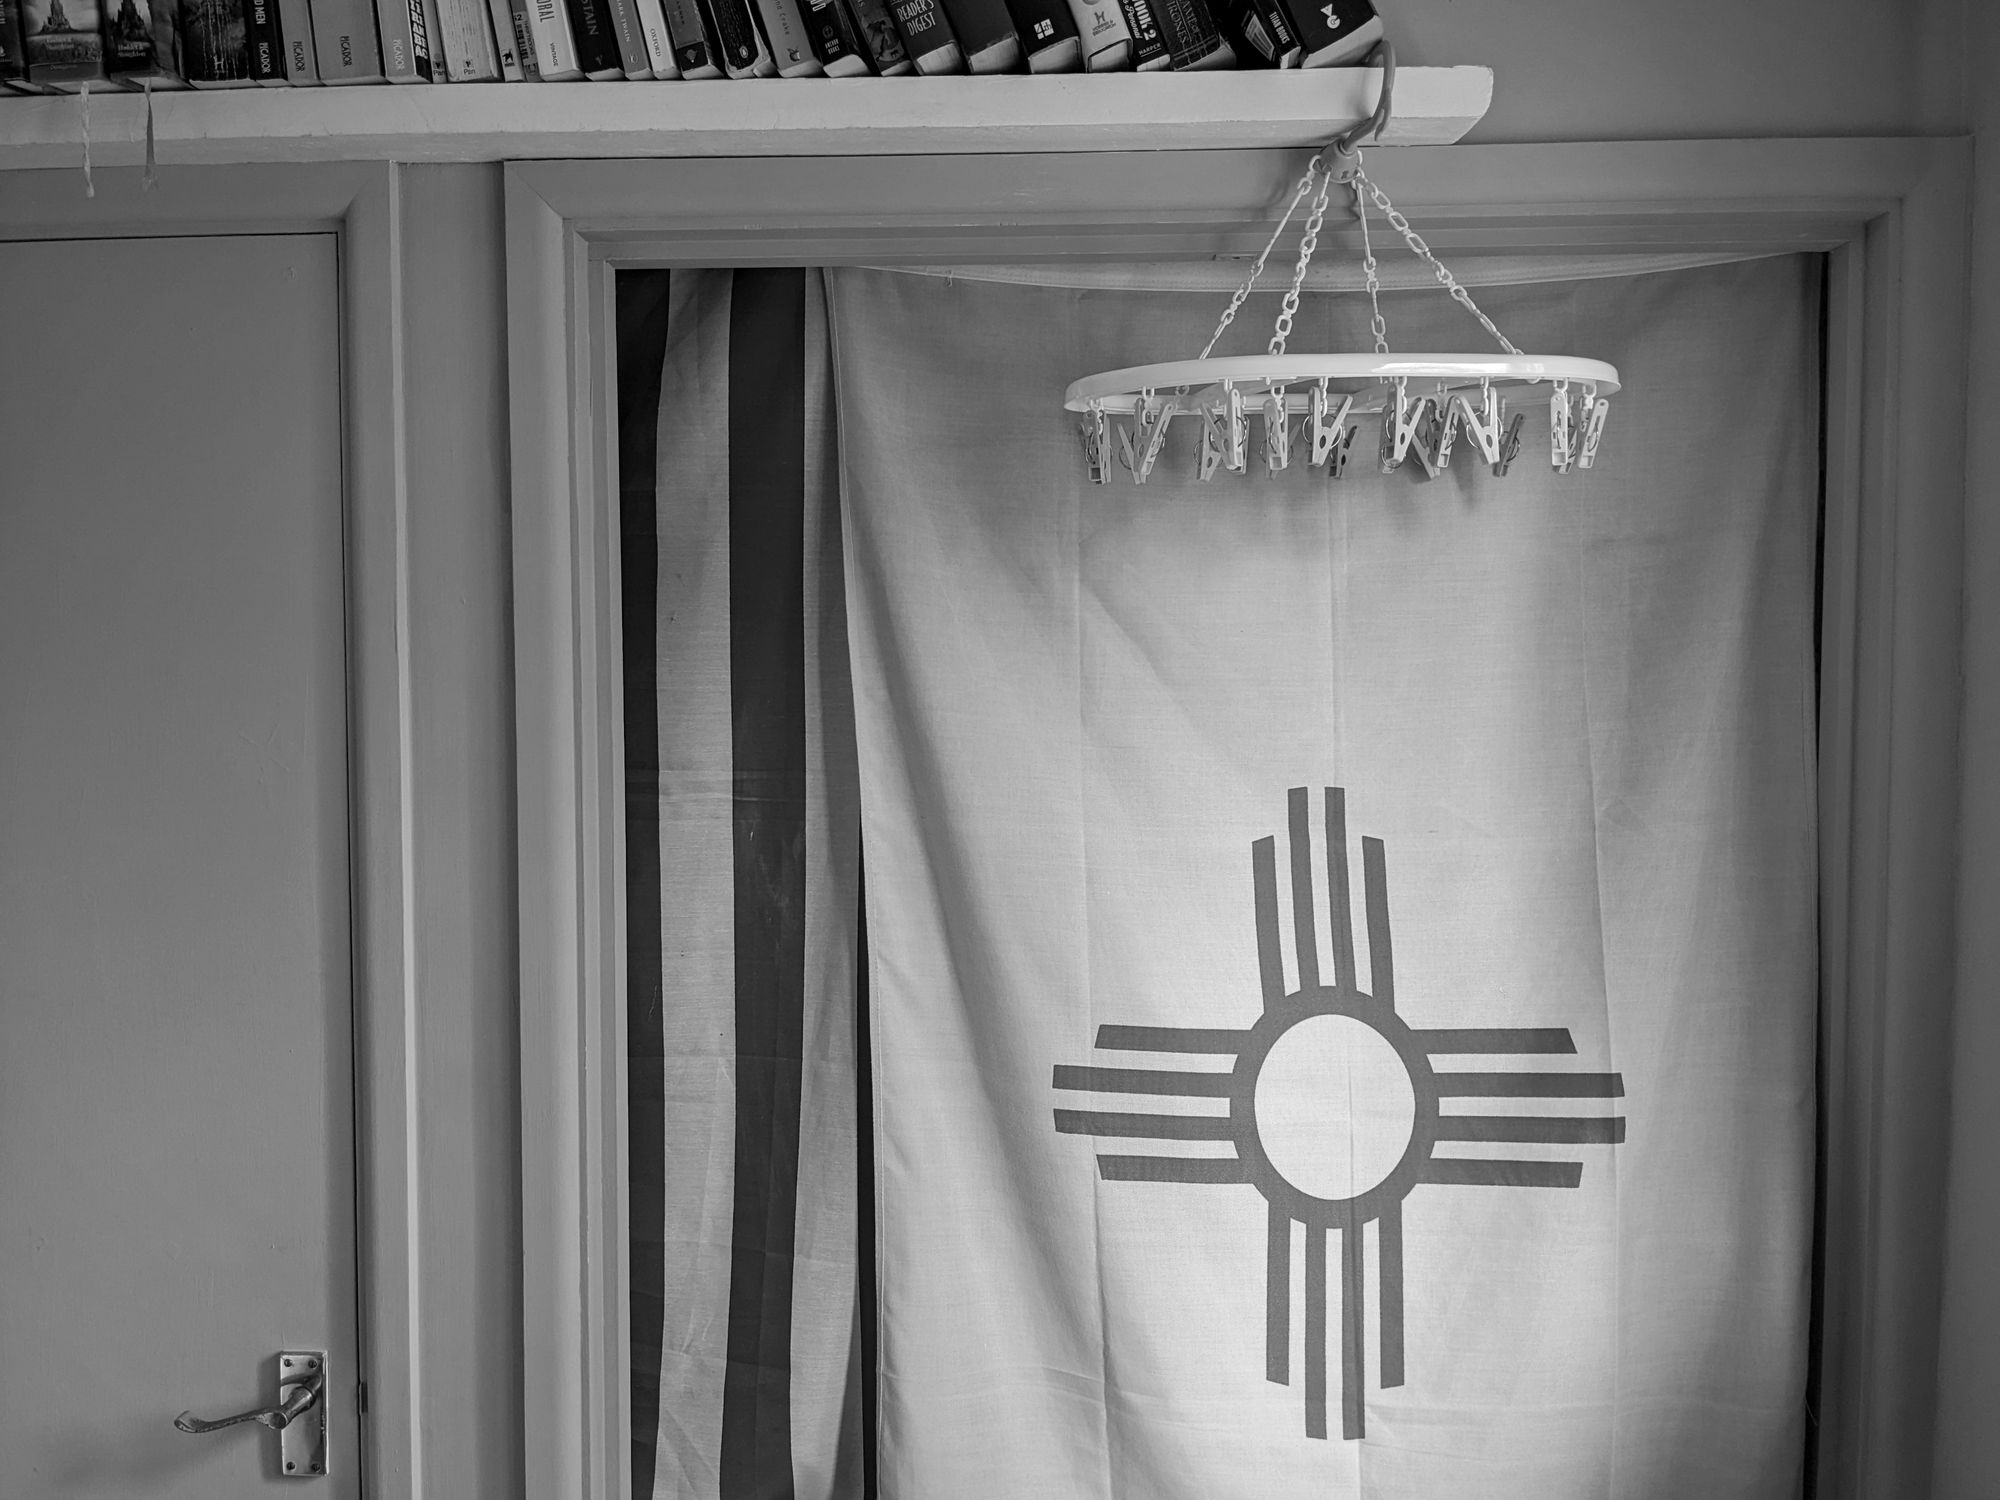 A sock dryer hanging over a New Mexico flag